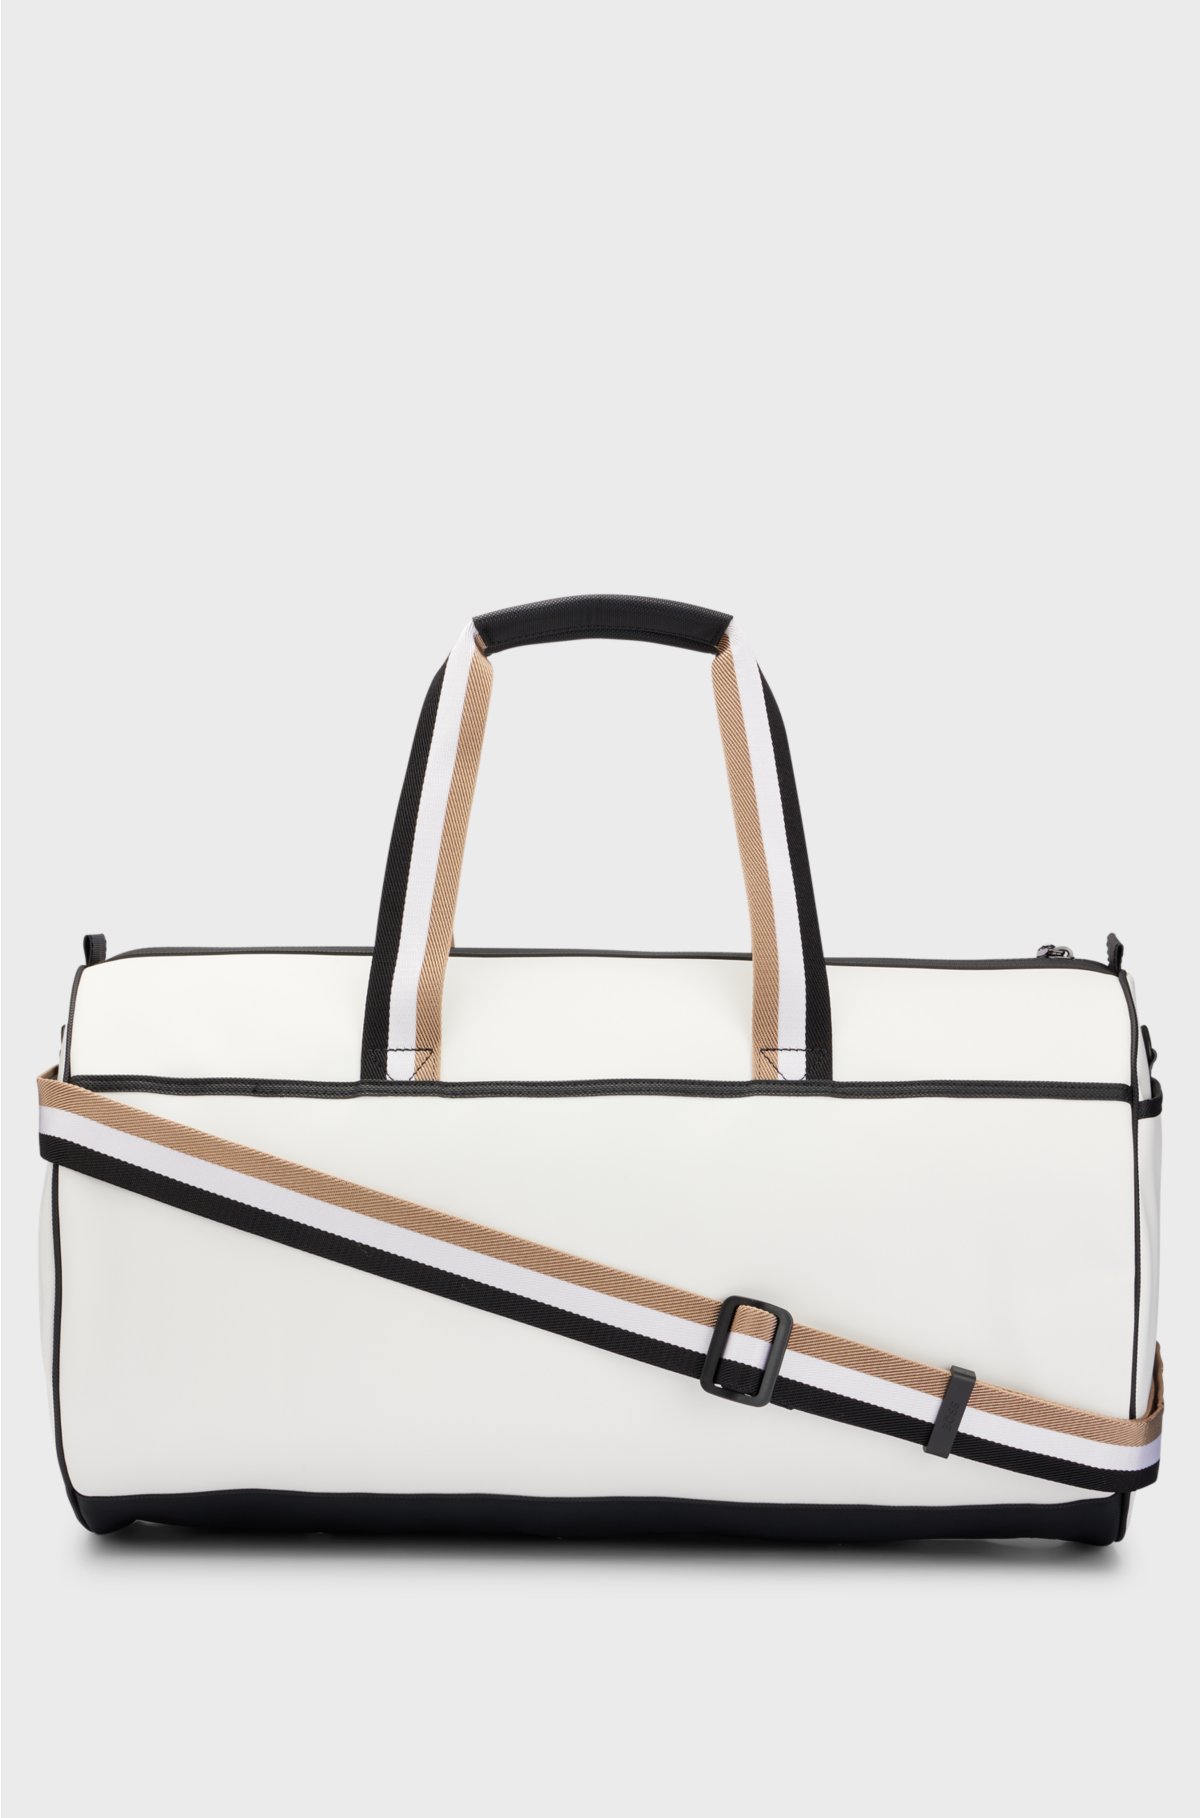 BOSS x Matteo Berrettini  Faux-leather holdall with contrast logo, White